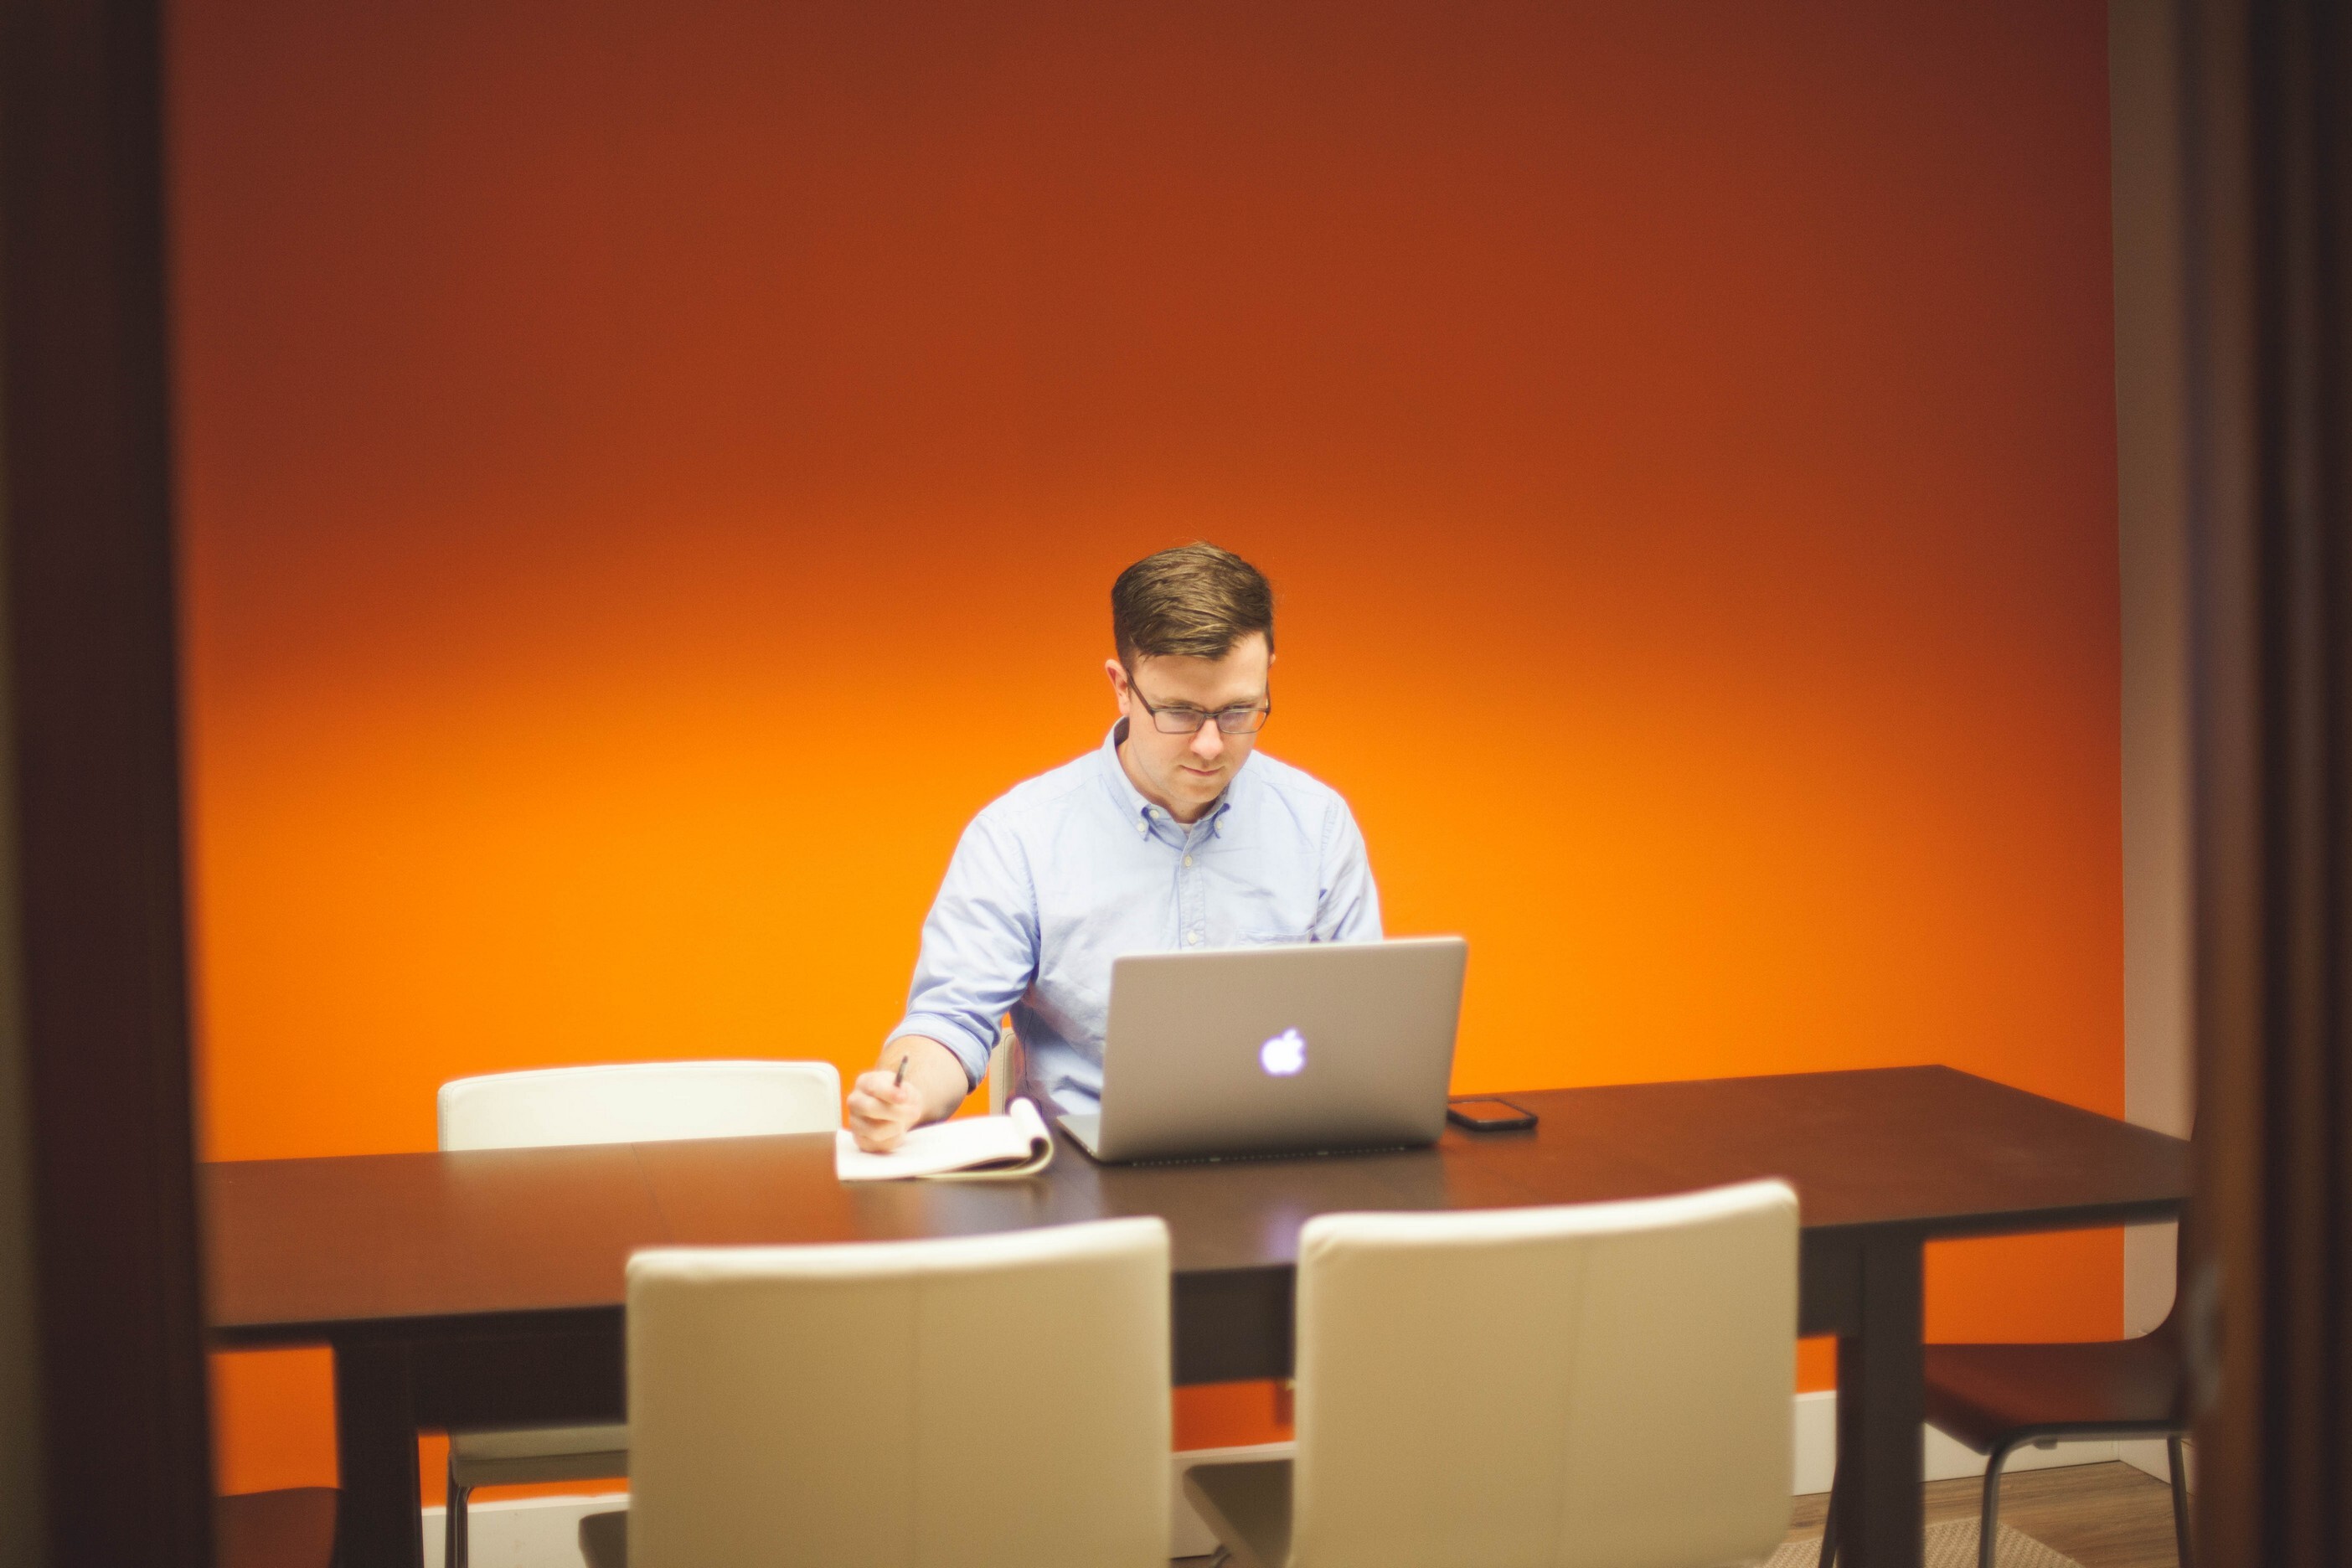 A man sitting at an apple computer in front of an orange wall